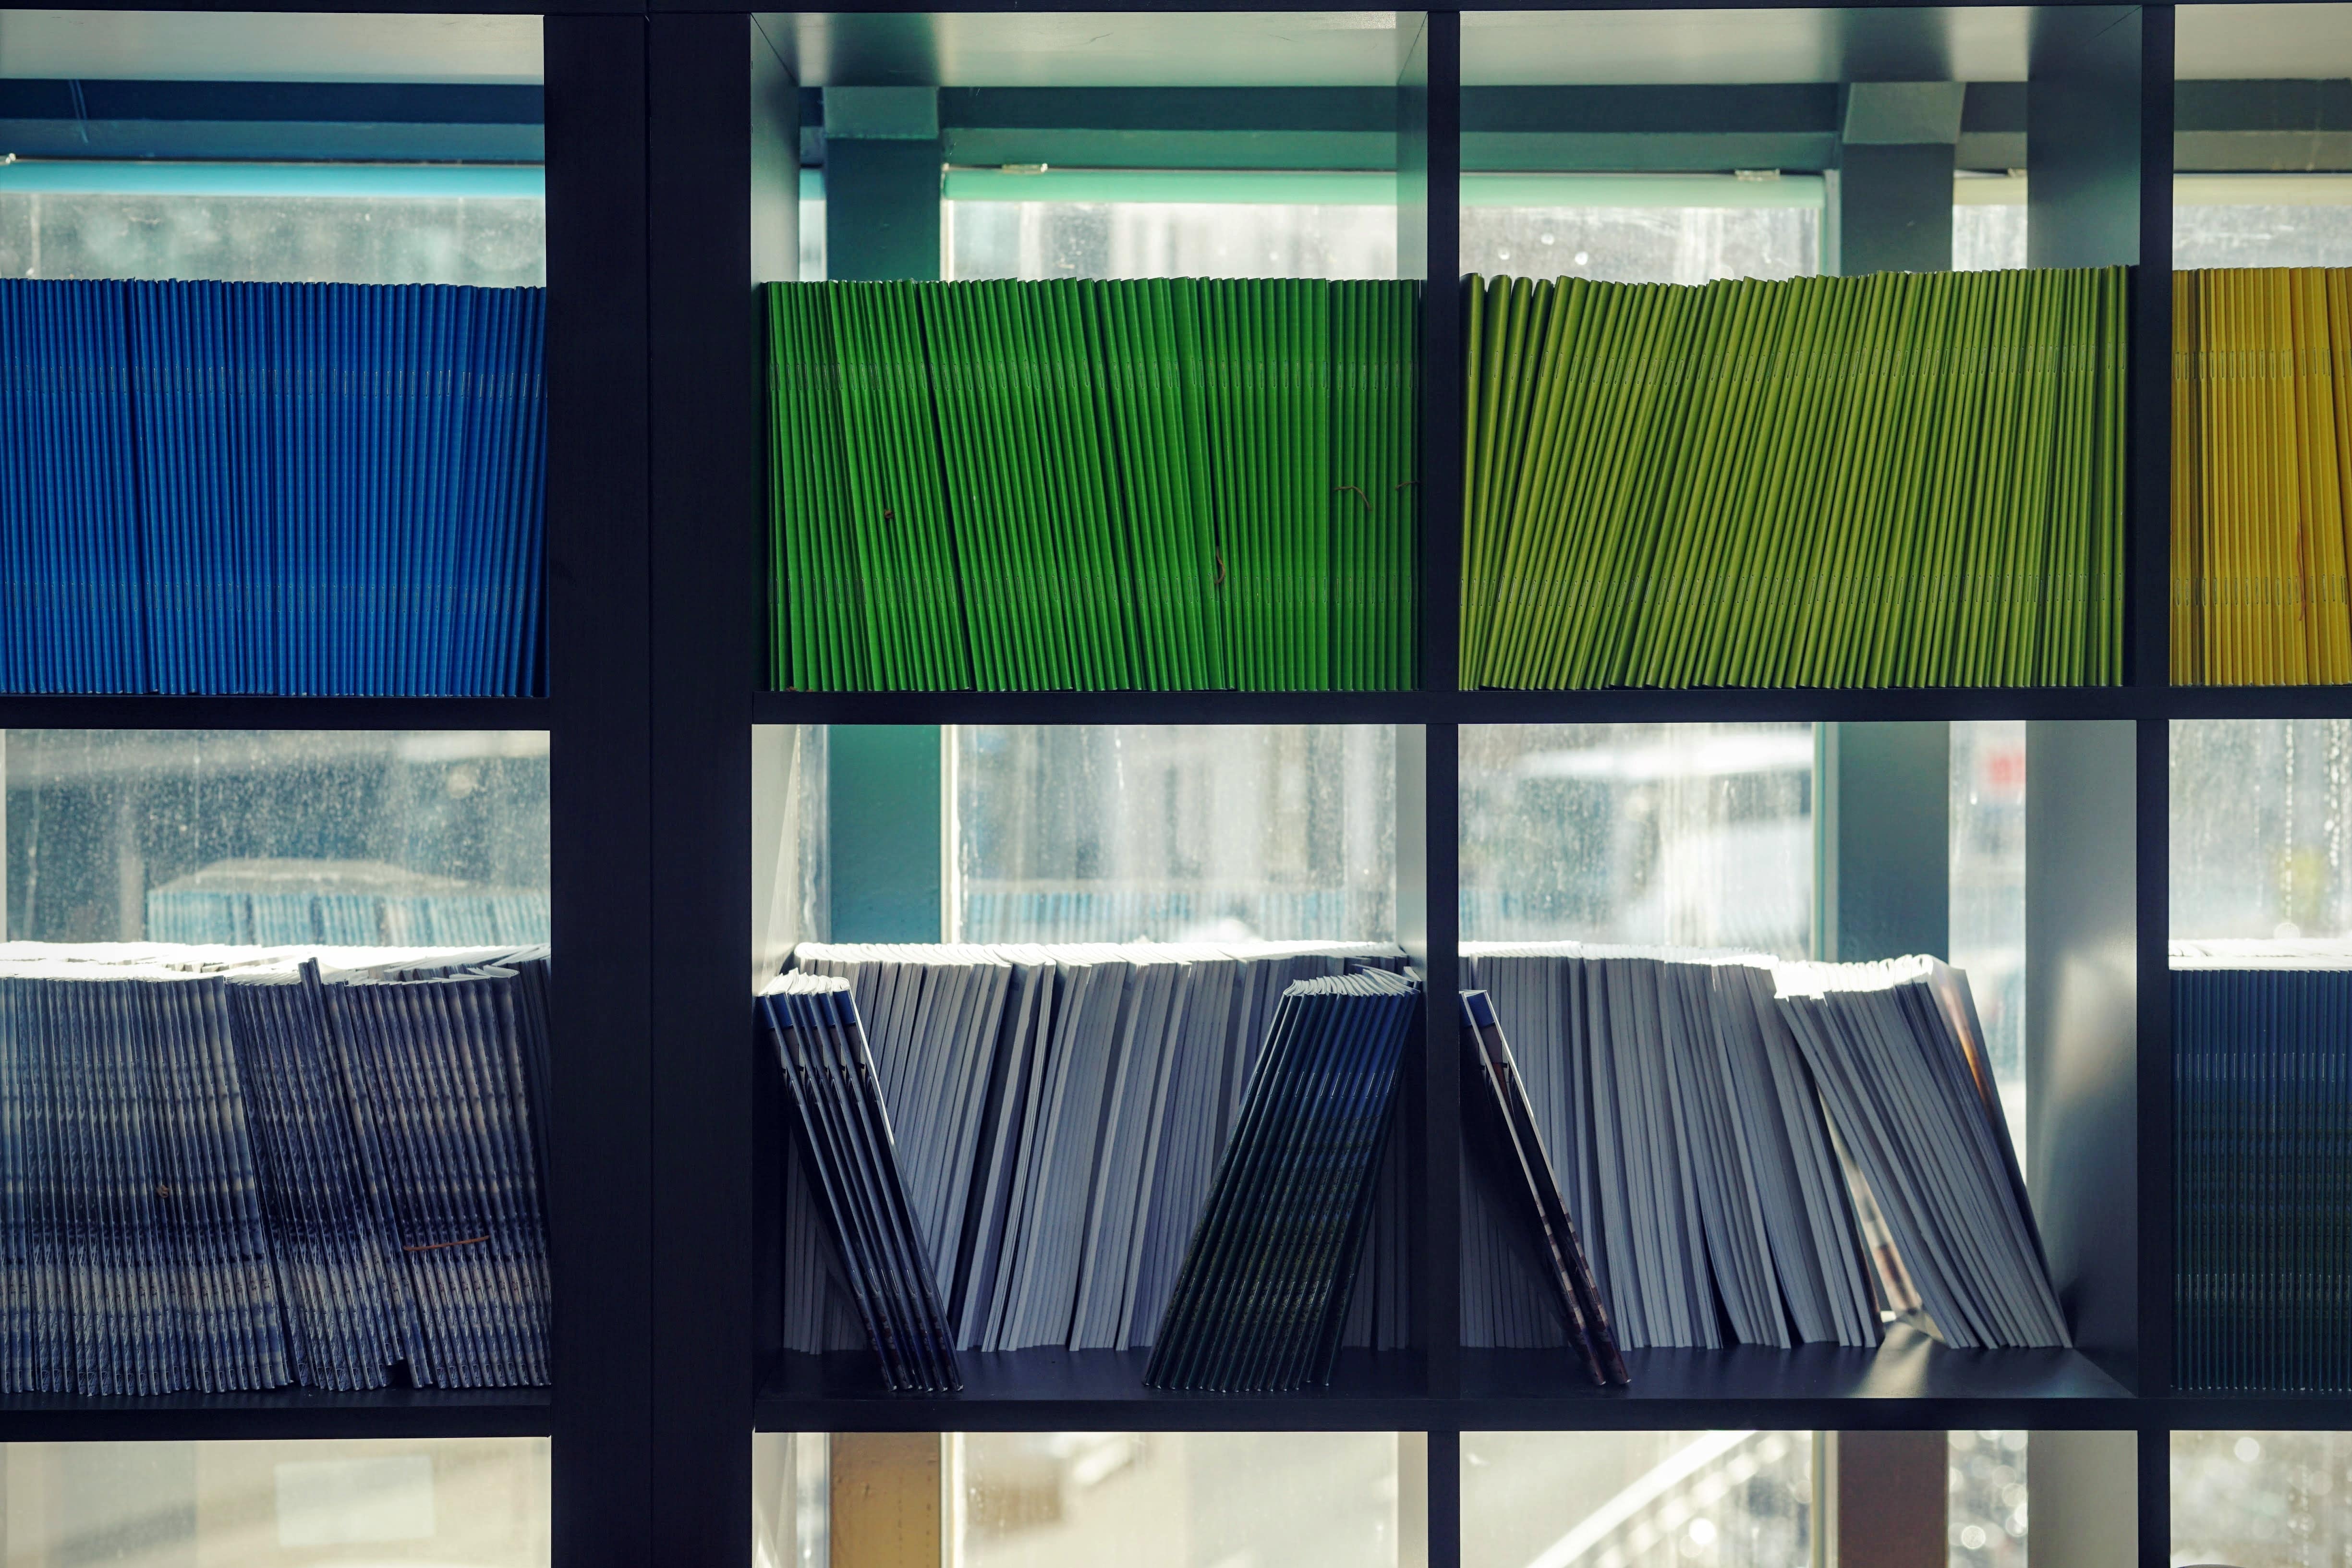 Colourful books lined up in square bookshelves